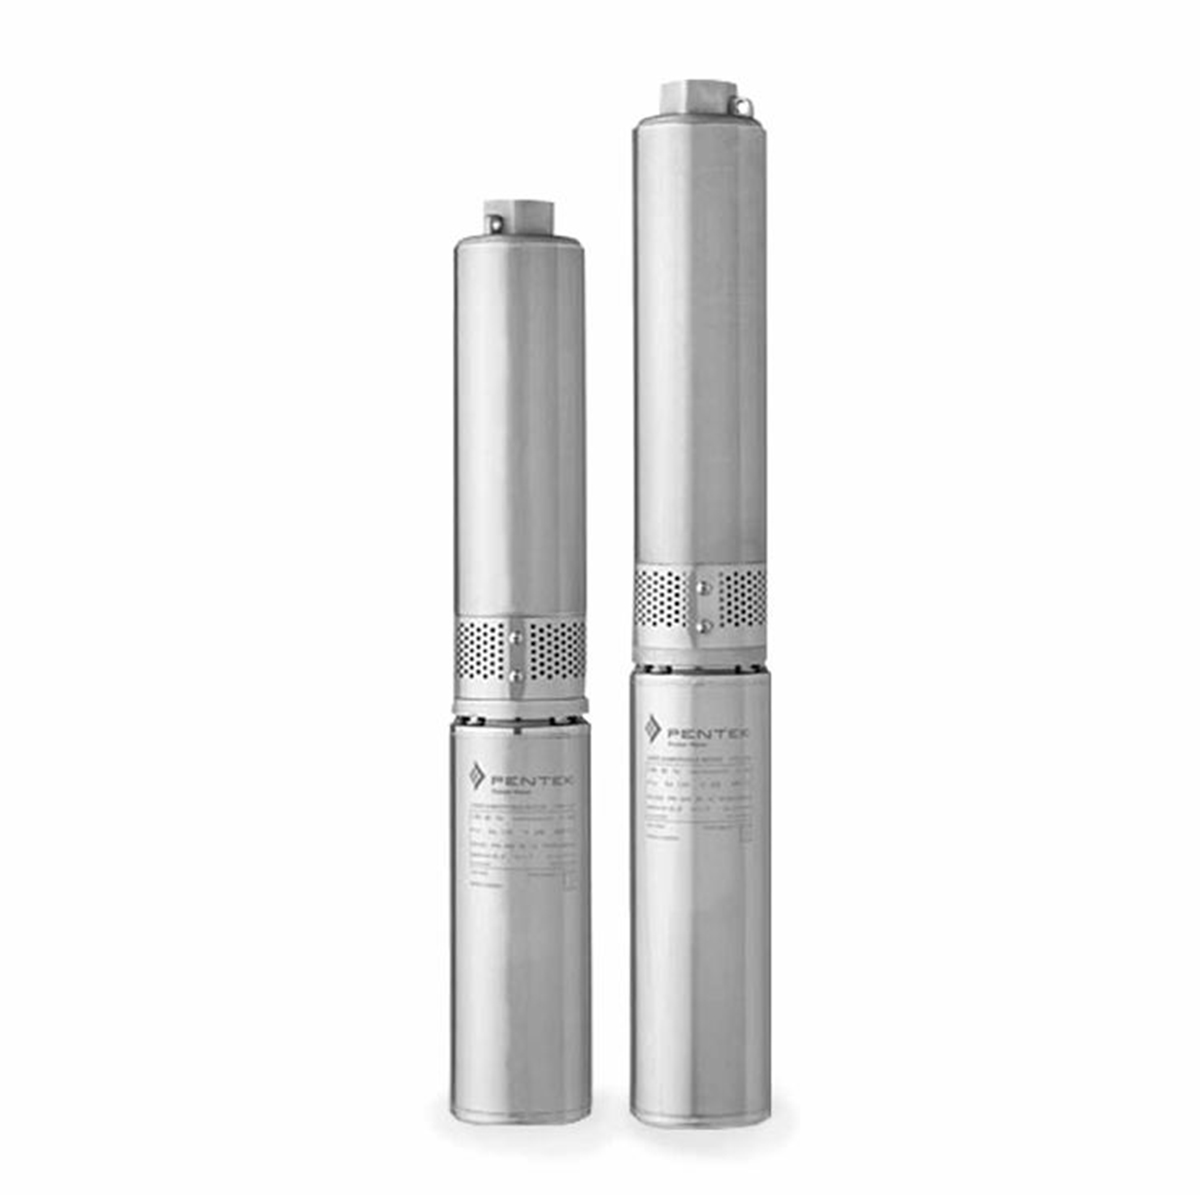 Myers 3ST52-8PLUS-P4 Submersible Stainless Steel Pump 3-Wire 1PH